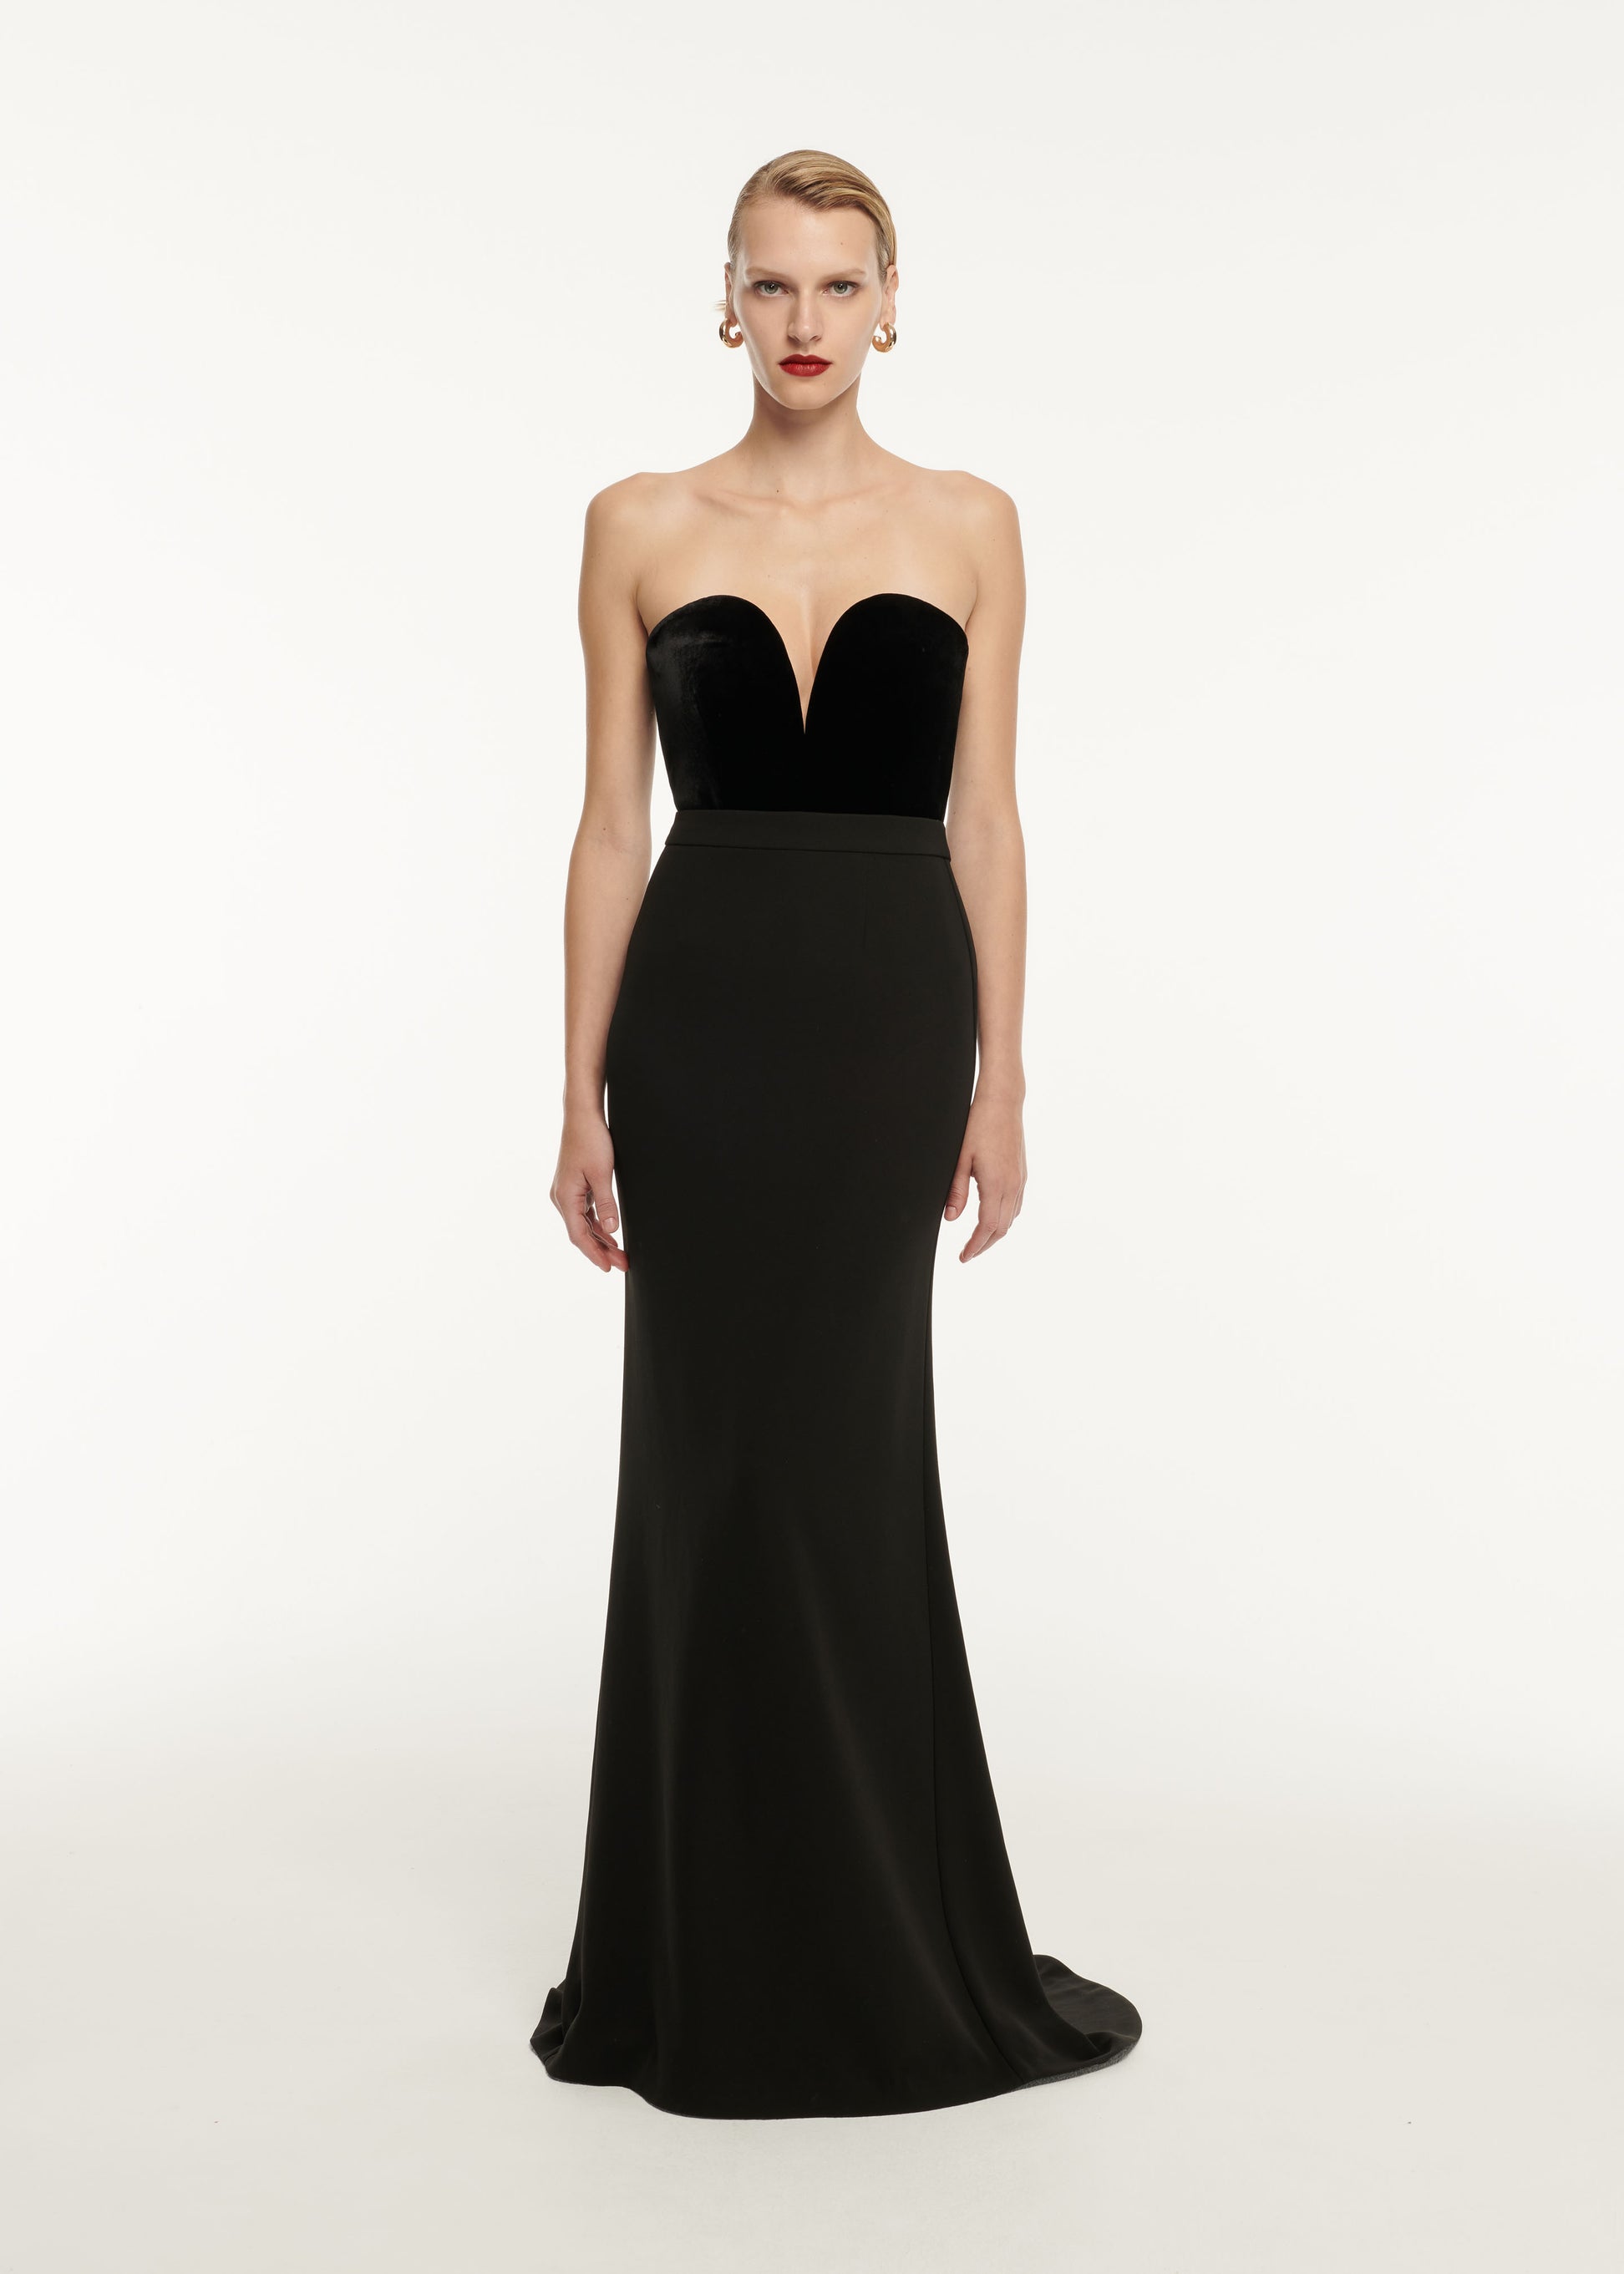 A woman wearing the Strapless Velvet Top in Black